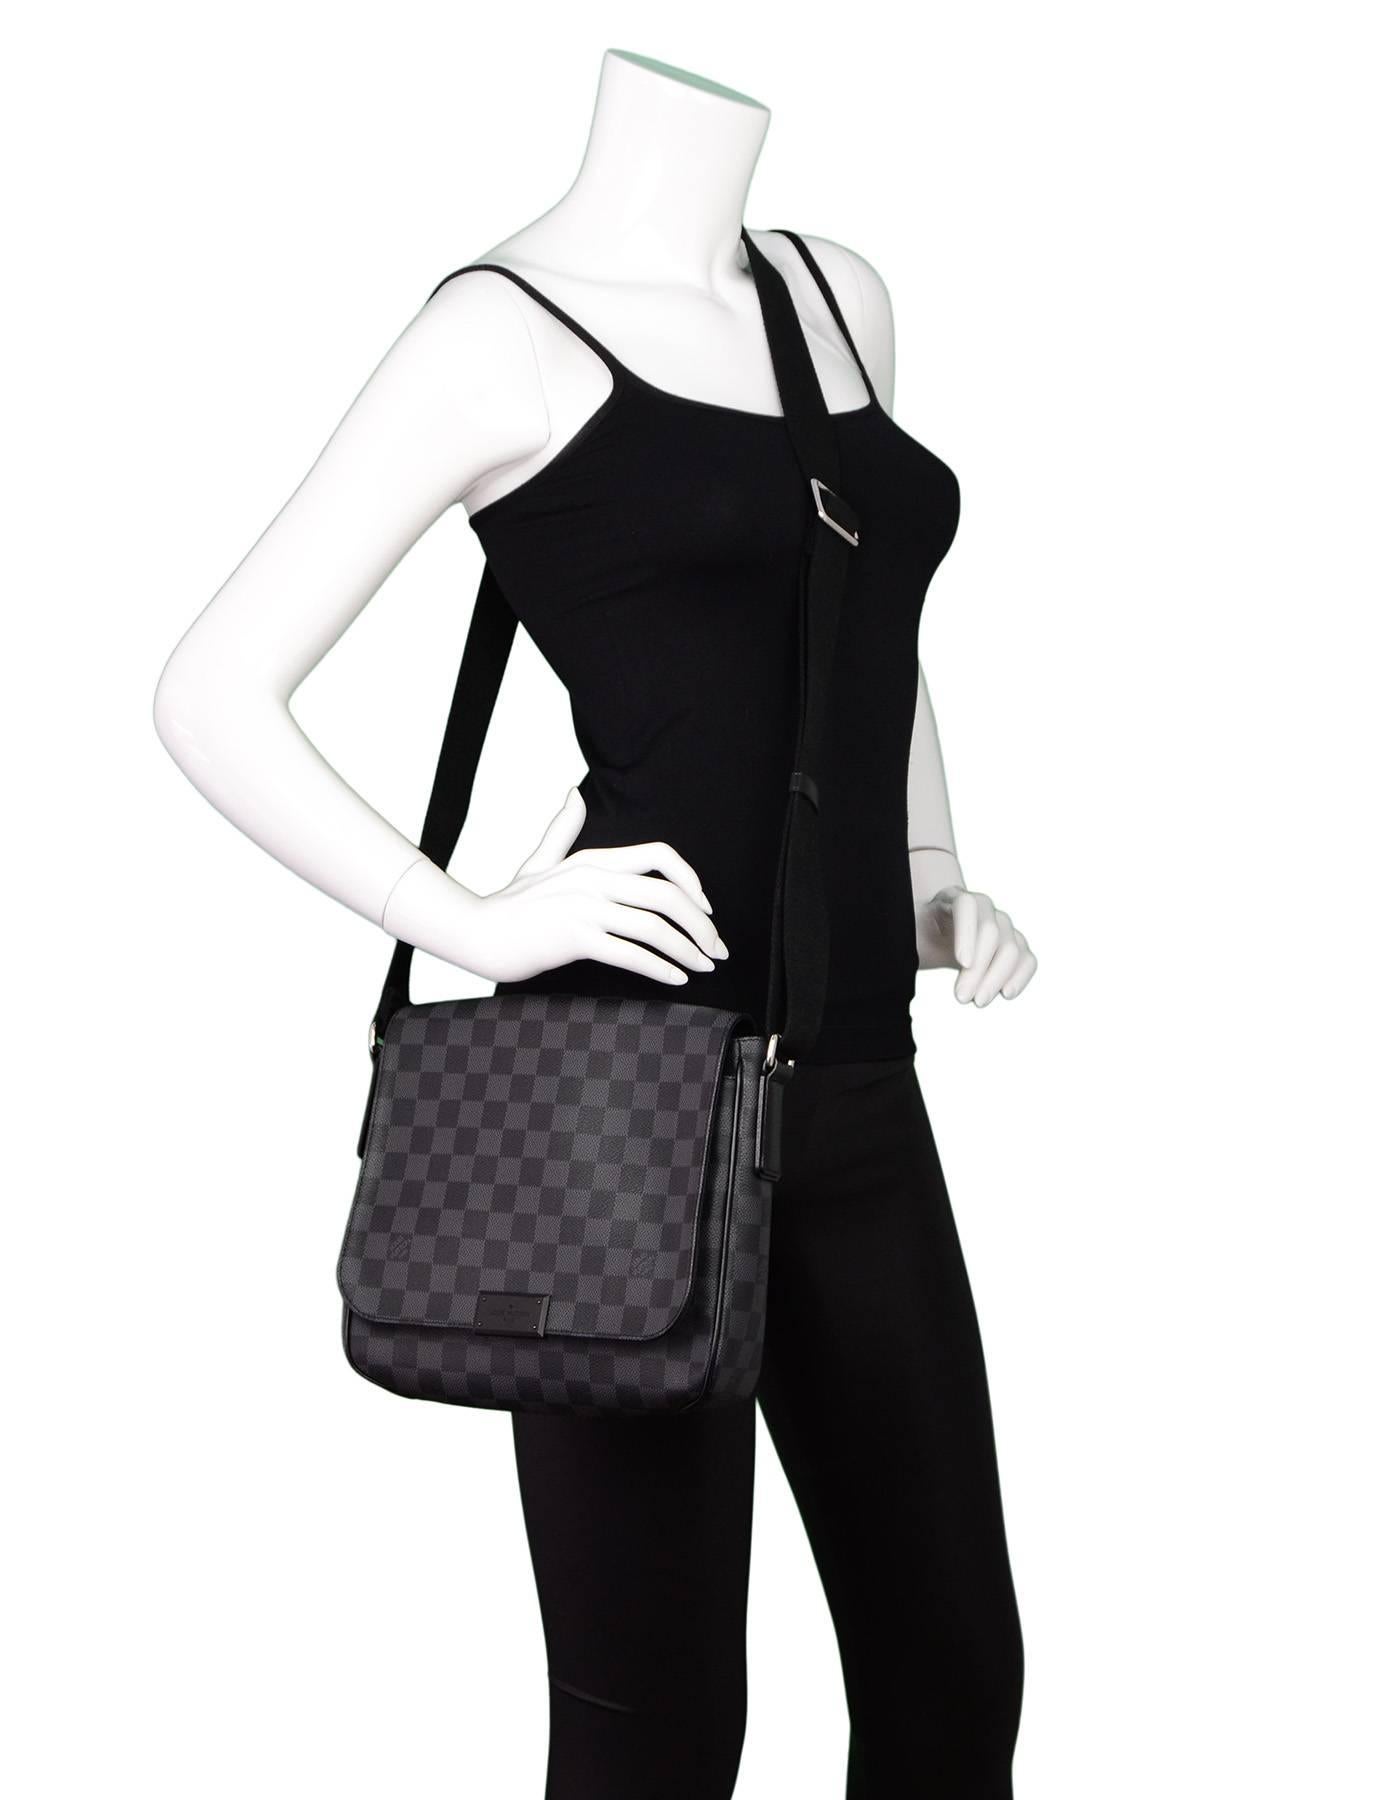 Louis Vuitton Graphite Damier District PM Crossbody Bag

Made In: France
Year of Production: 2014
Color: Black and charcoal
Hardware: Silvertone
Materials: Coated canvas and leather trim
Lining: Black textile
Closure/Opening: Flap top with magnetic